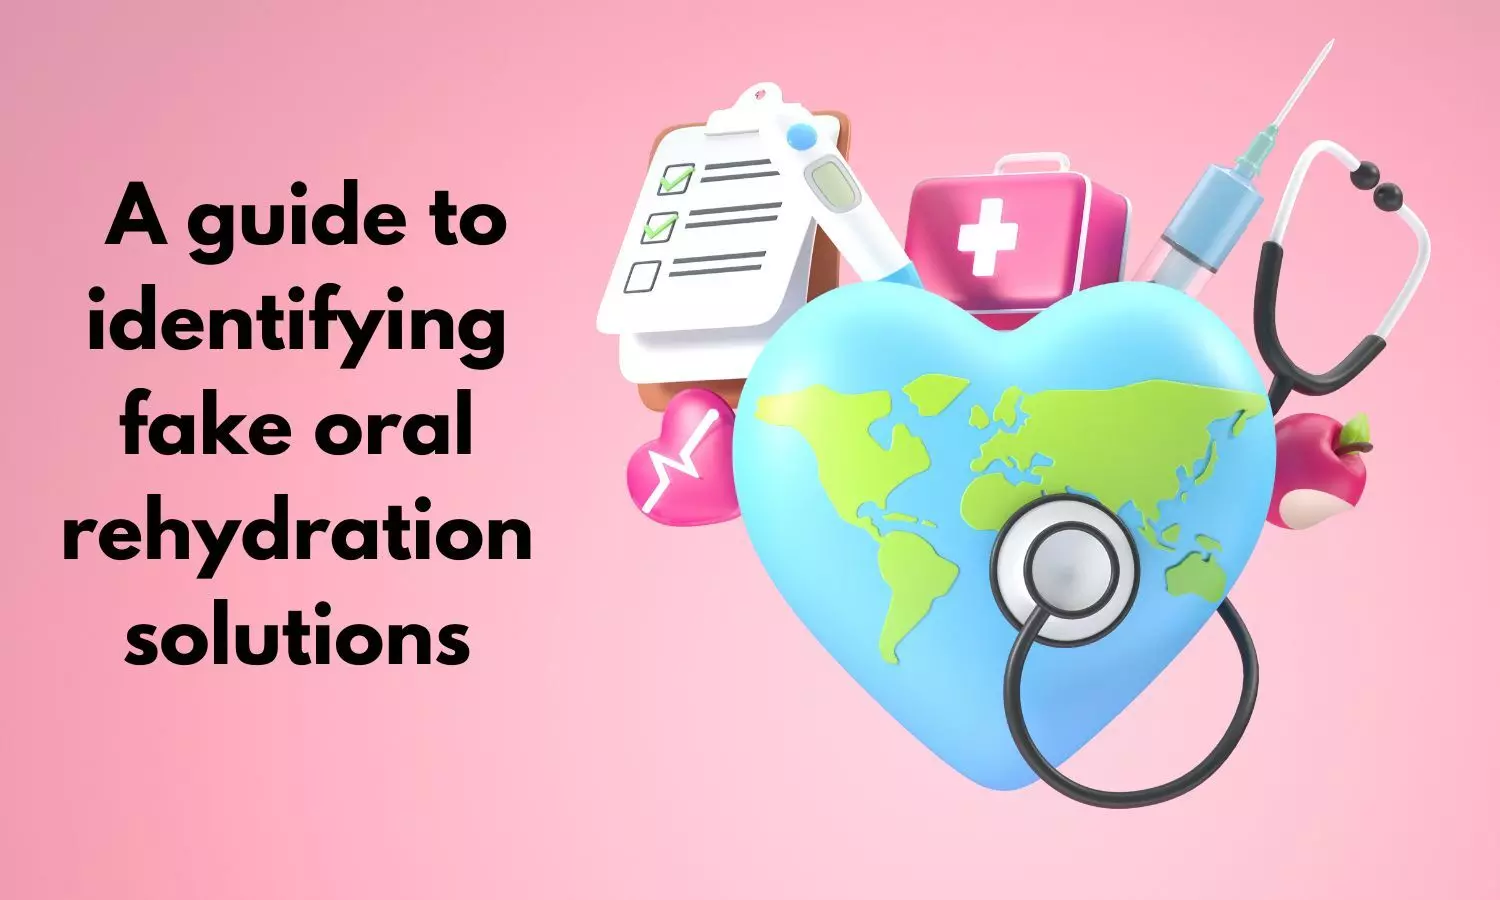 A guide to identifying fake oral rehydration solutions